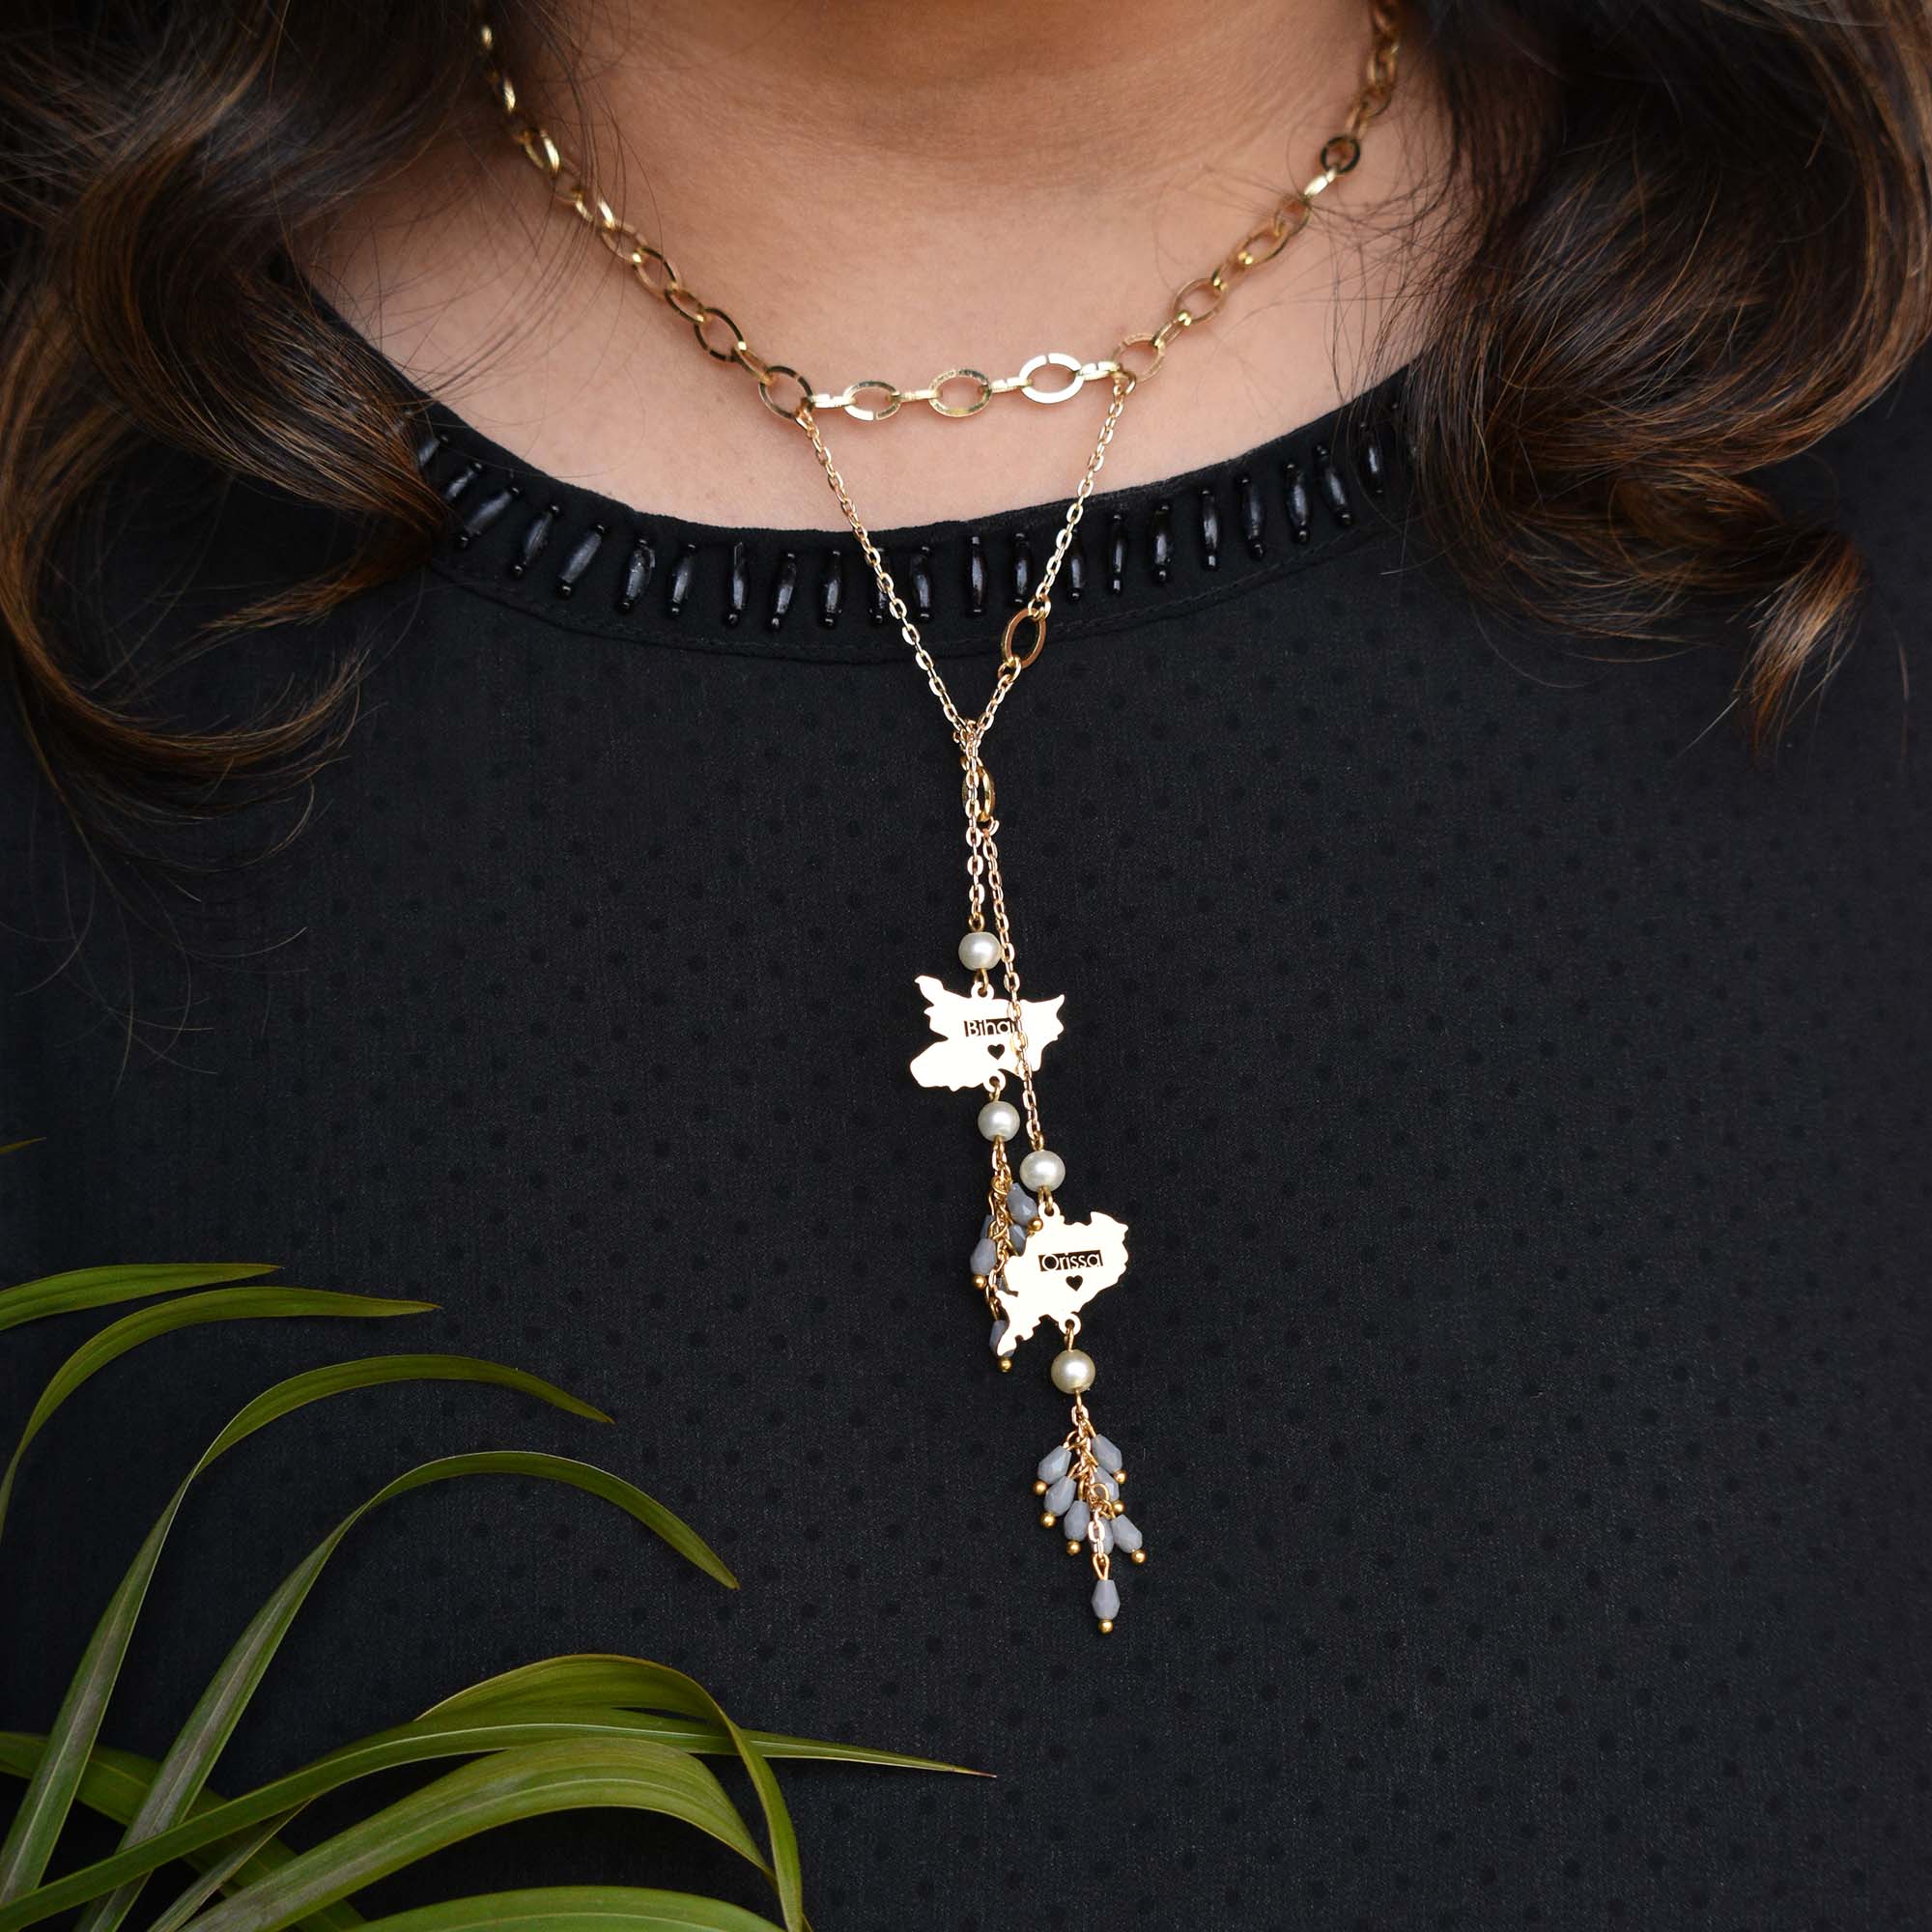 Knot - Me State Charm Necklace